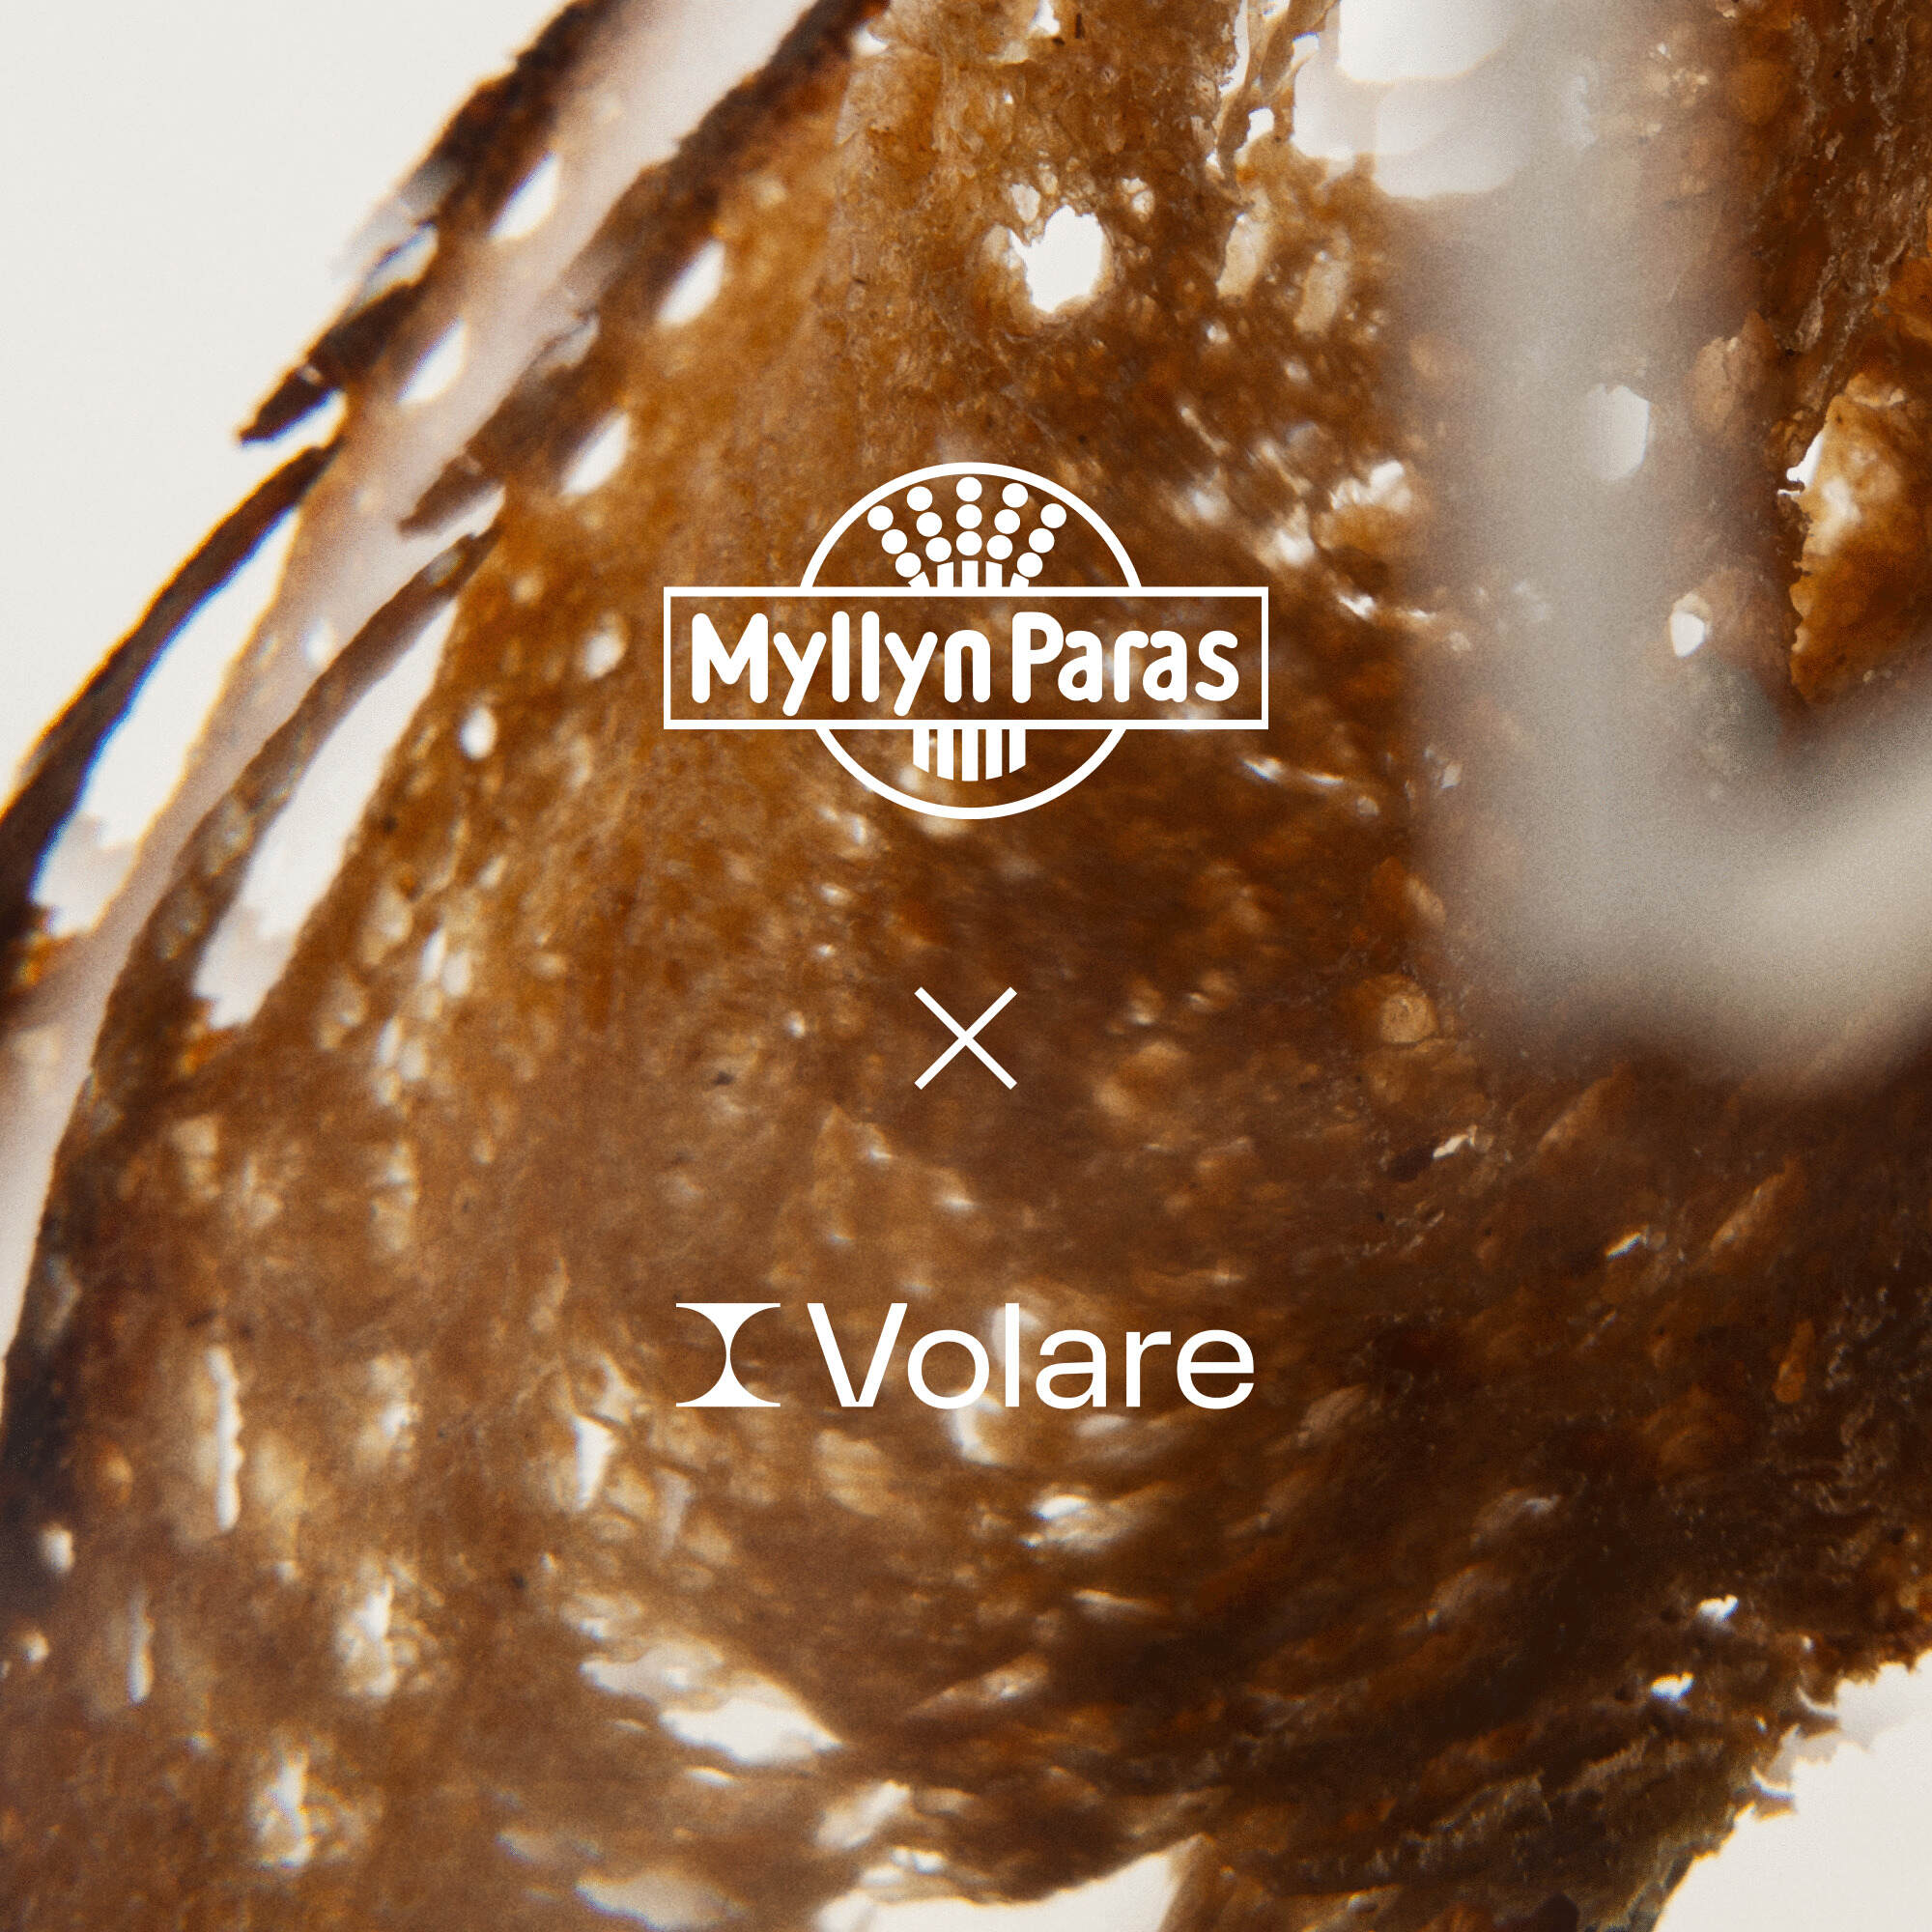 Myllyn Paras and Volare logos on a brown background